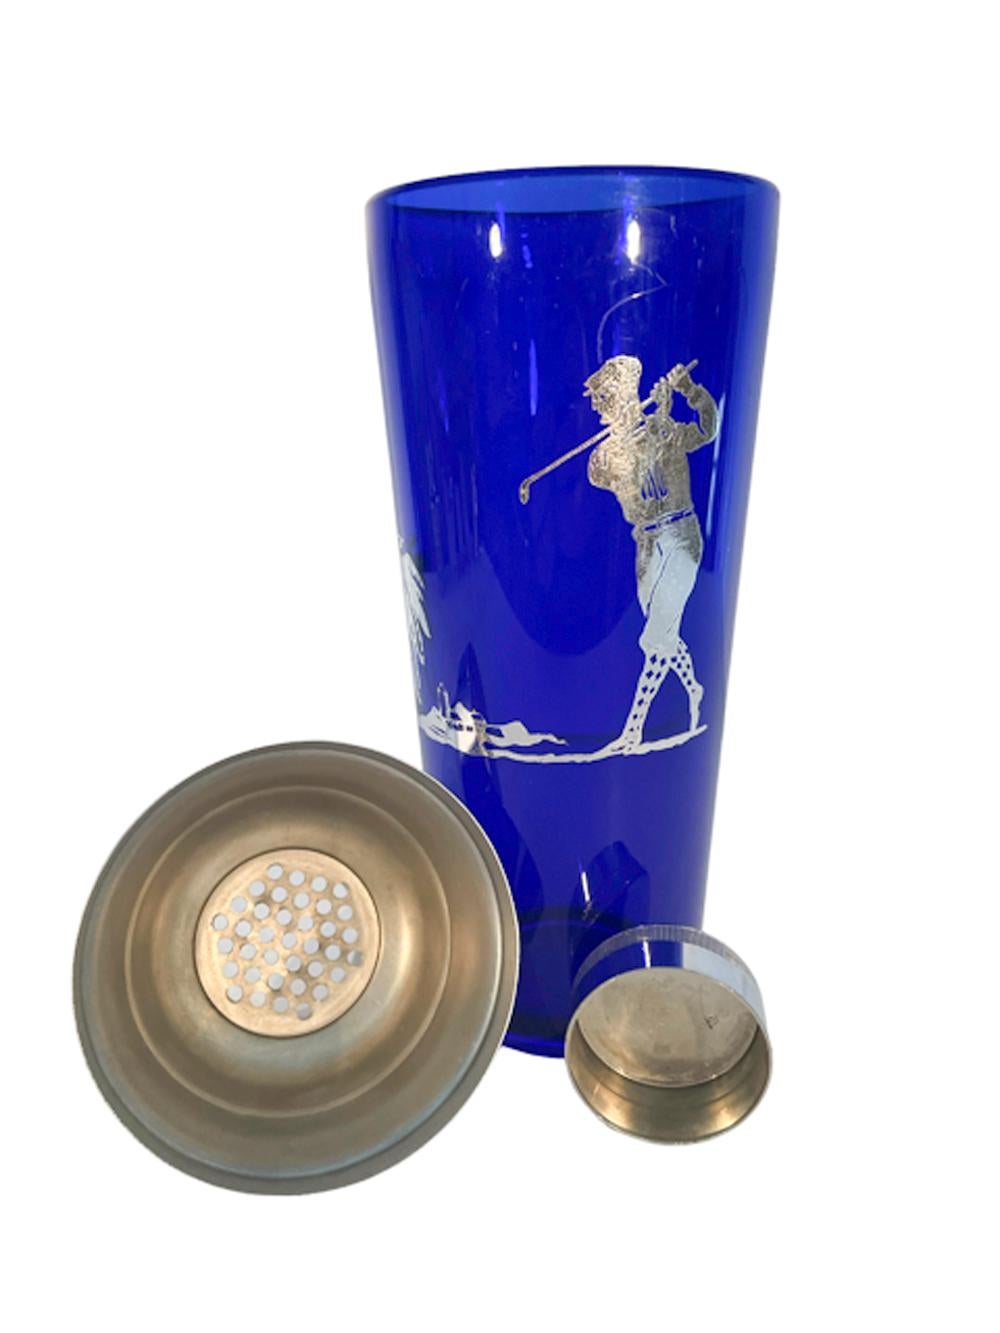 American Art Deco Silver Overlay Cobalt Cocktail Shaker with Golfer and Palm Tree